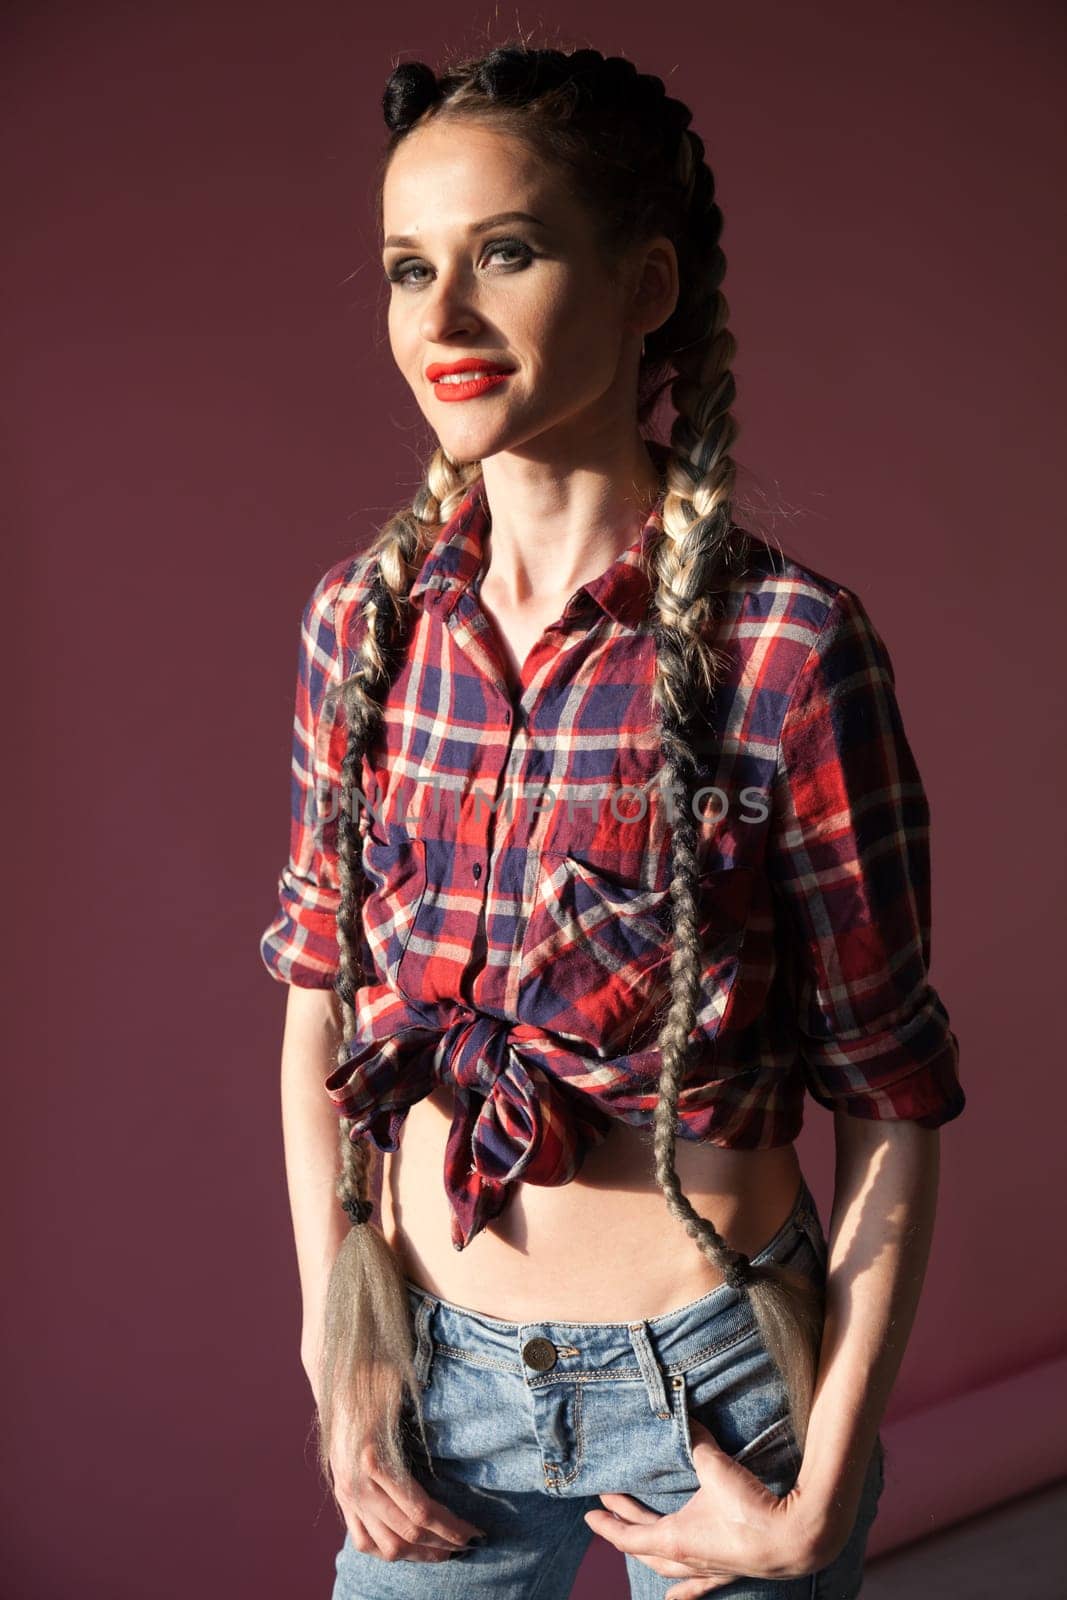 Portrait of a beautiful fashionable woman with braids in a moilshirt and jeans